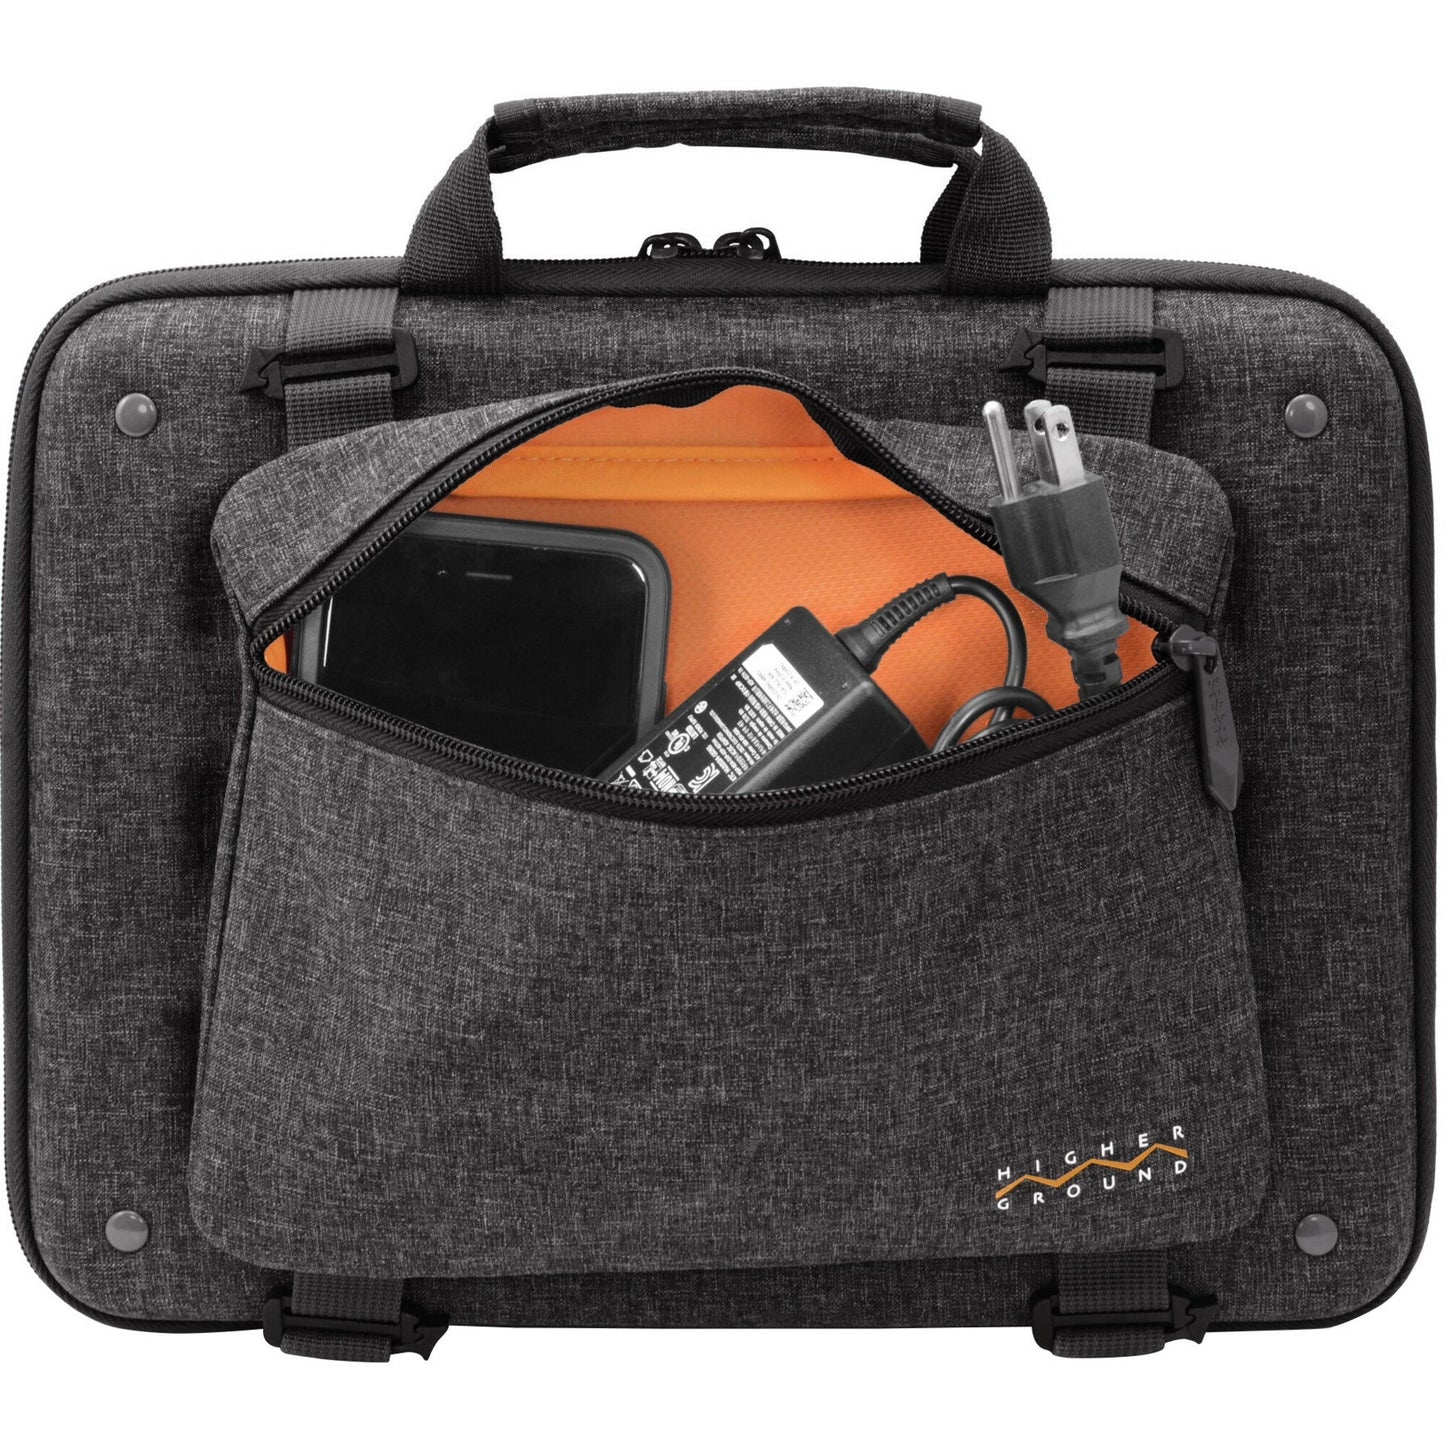 Higher Ground Shuttle 3.0 Carrying Case for 14" Notebook - Gray